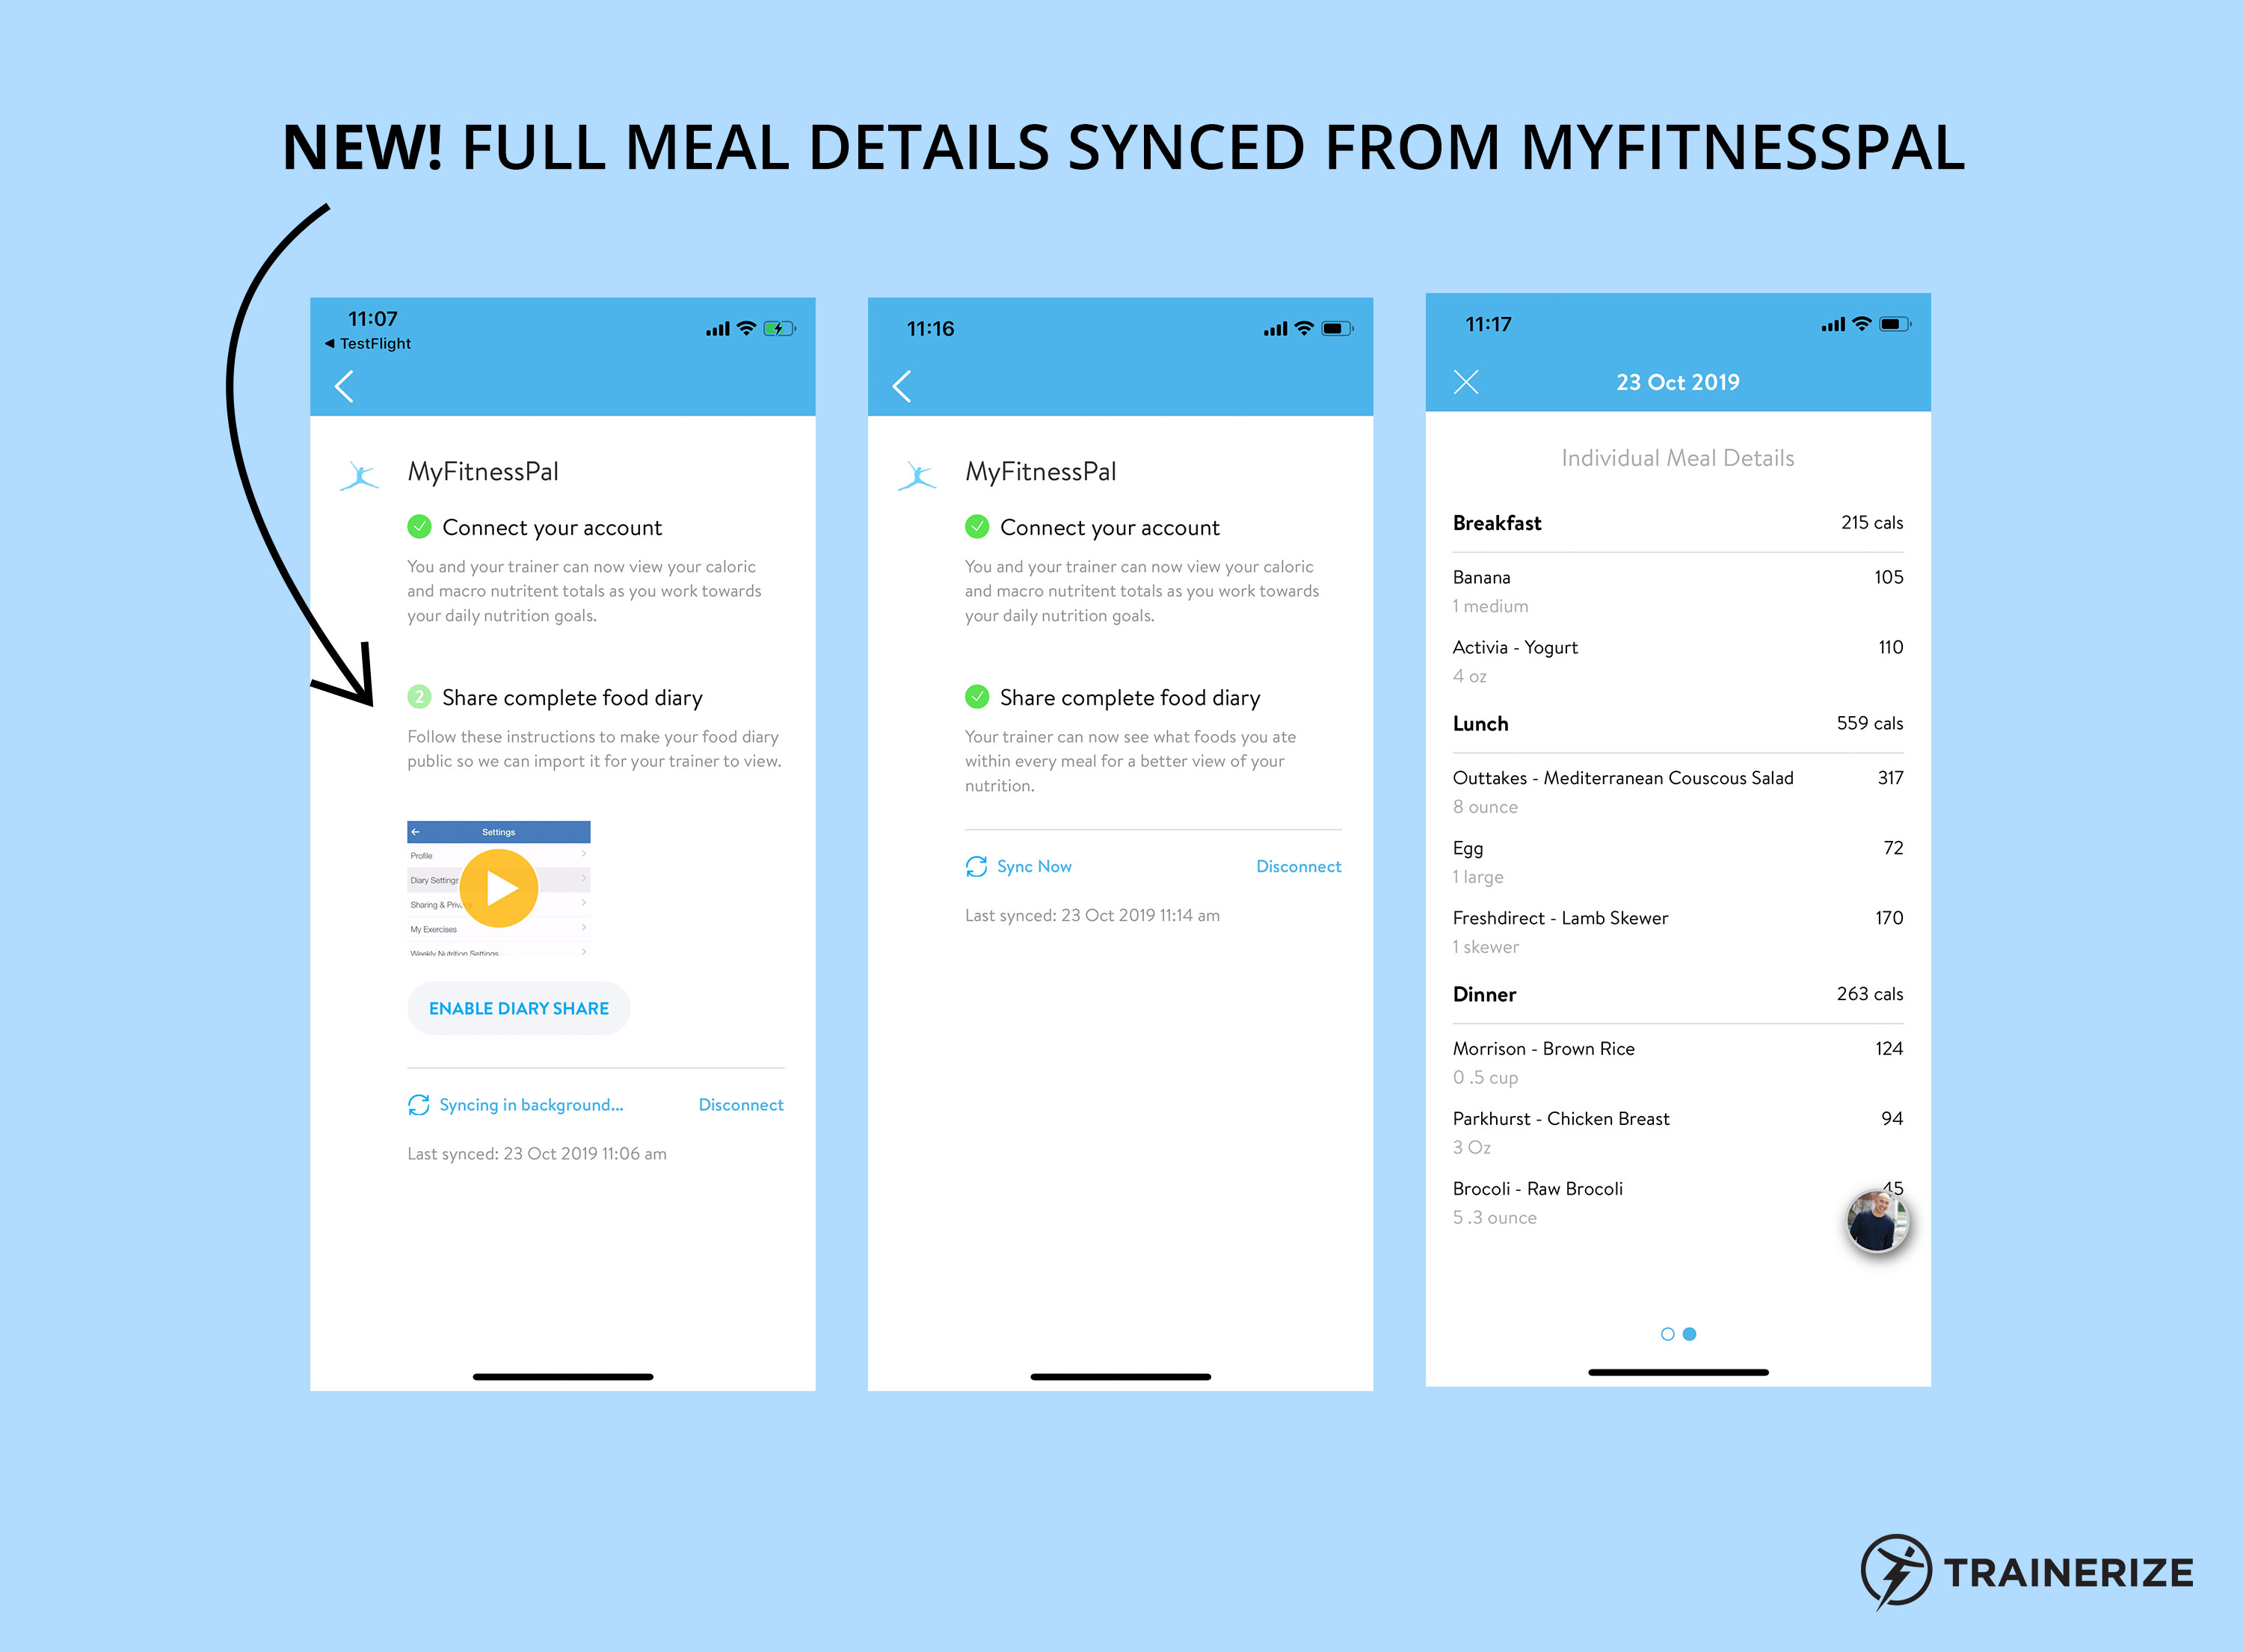 How Does MyFitnessPal Work As Canada's Most Popular Fitness App?